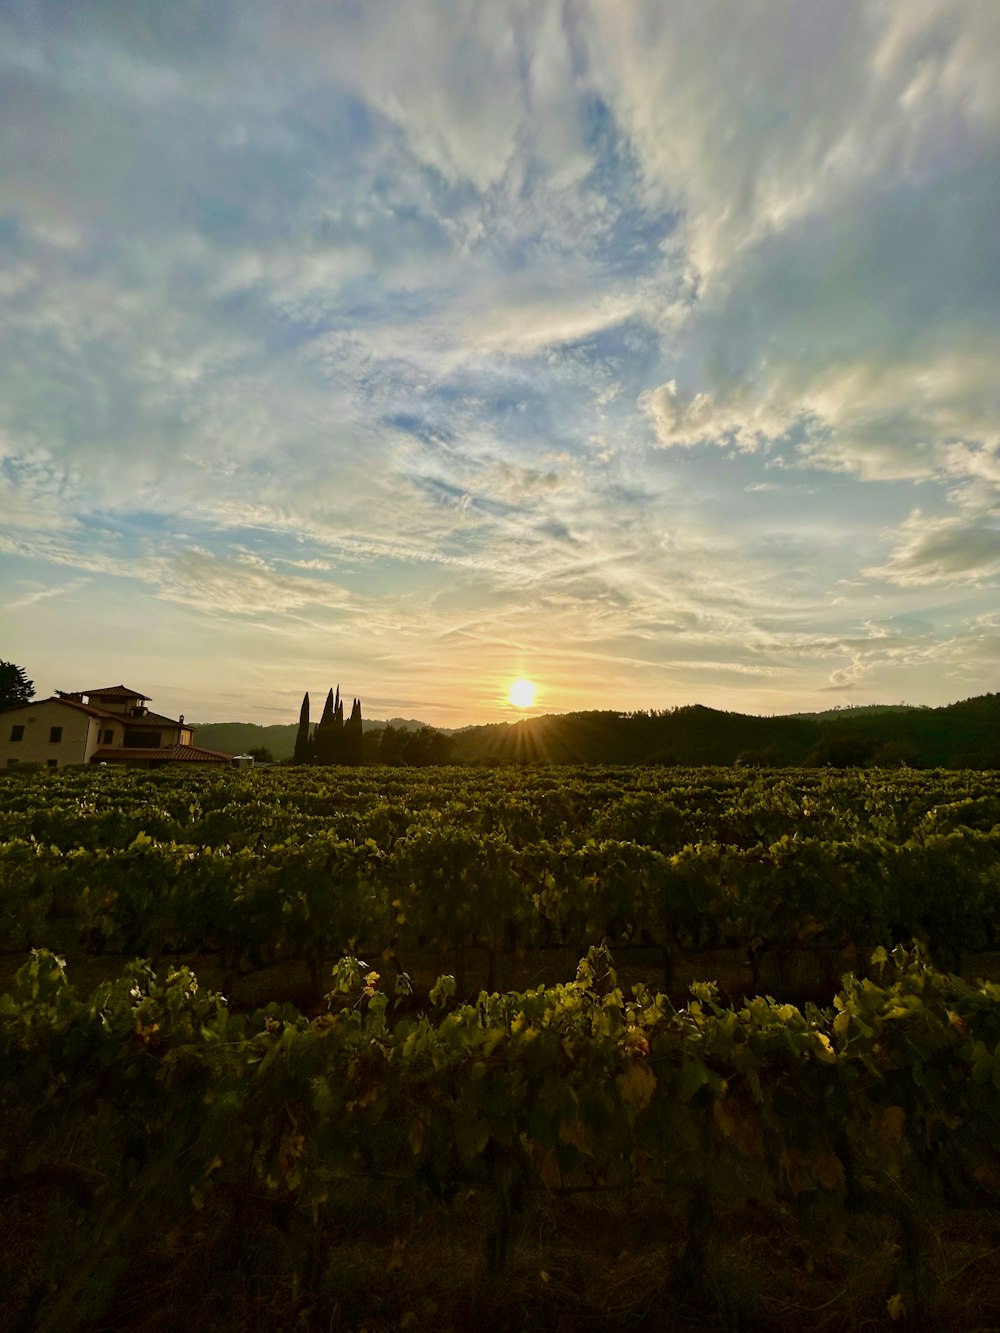 the sun is setting over a field of vines